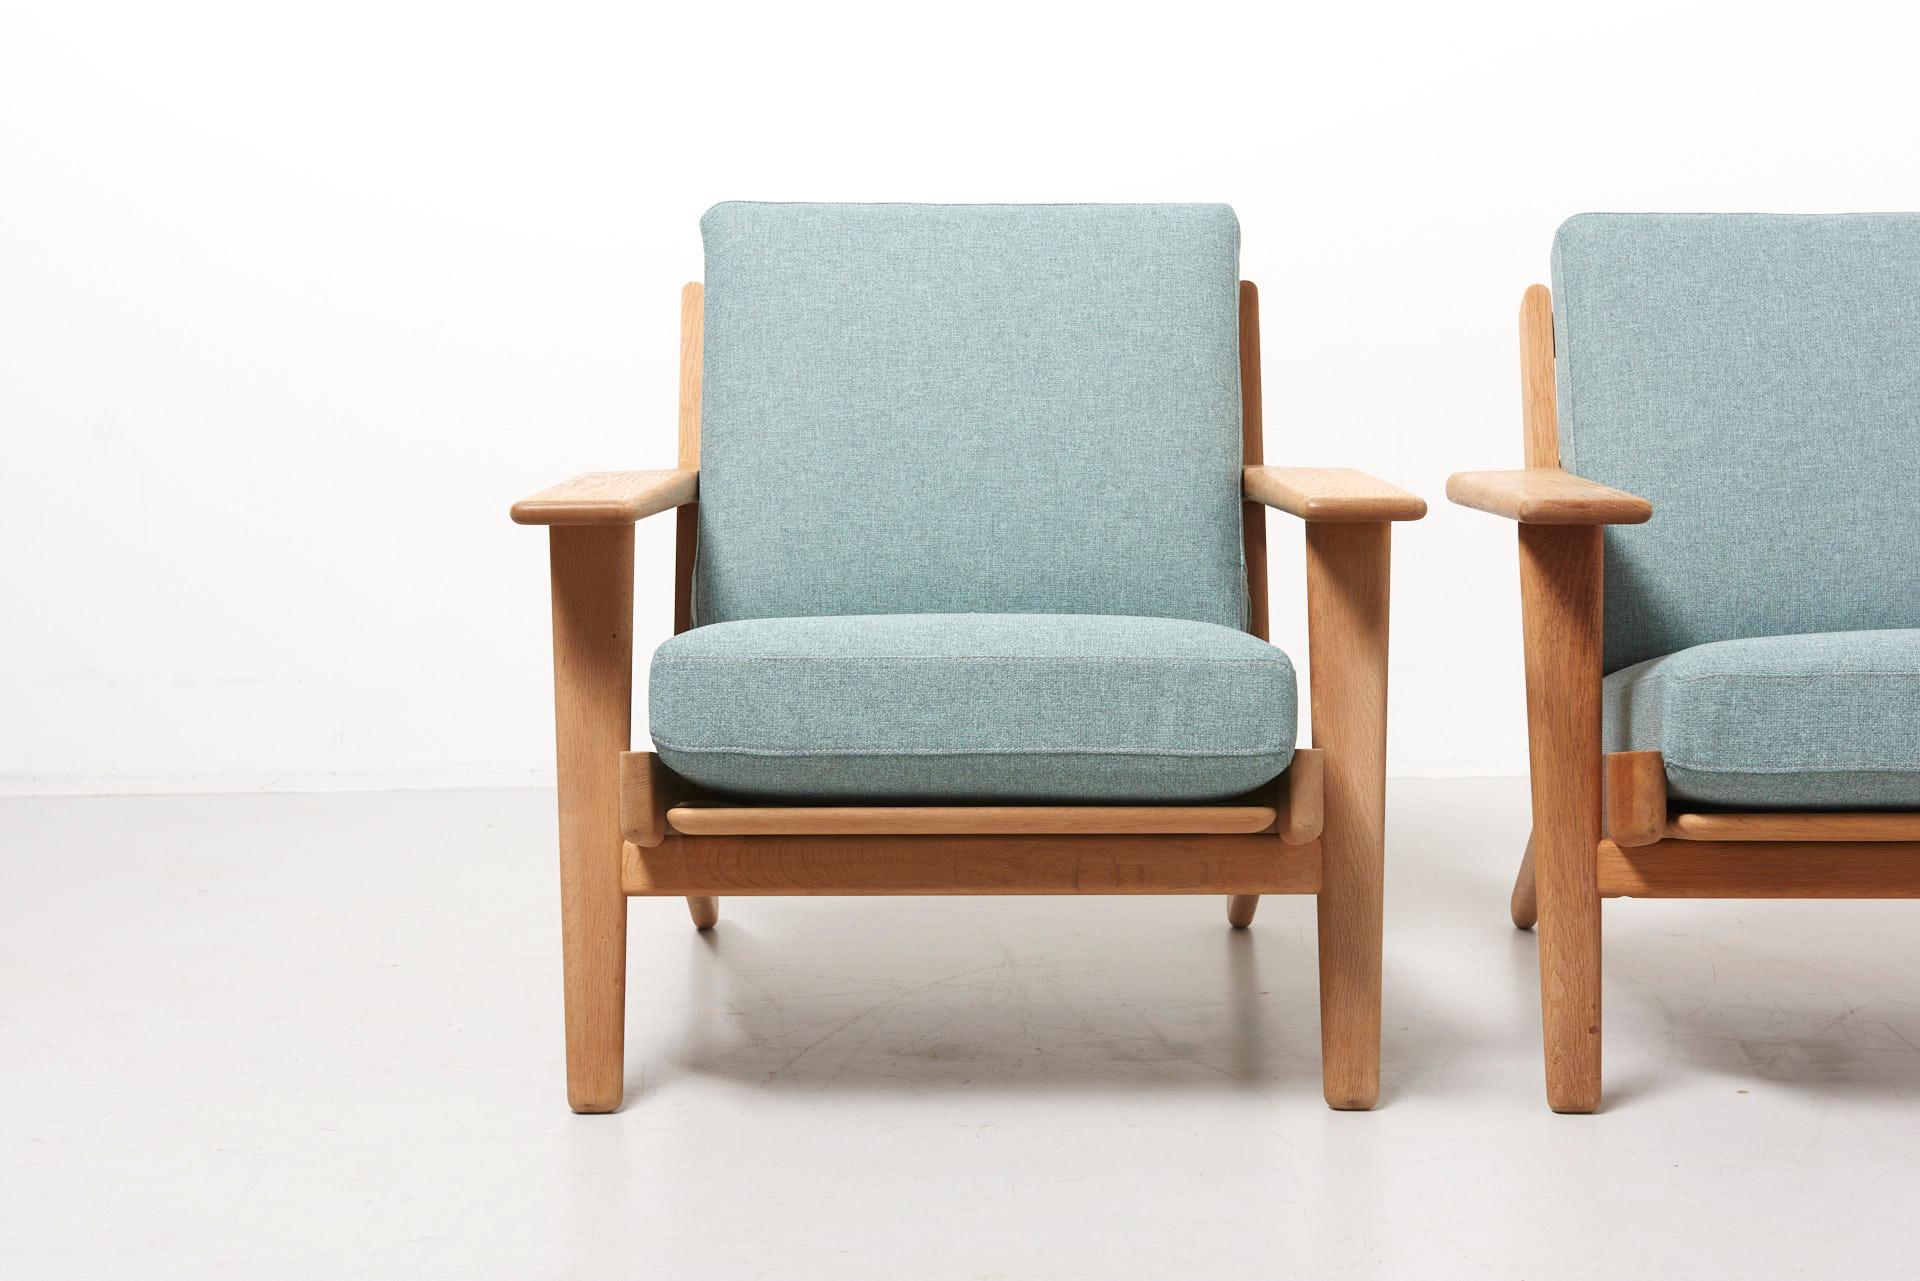 A pair easy chairs designed by Hans J. Wegner in 1953. Model GE-290, produced by GETAMA in Denmark.
Solid oak frame with new cushions upholstered in soft blue felt.
      